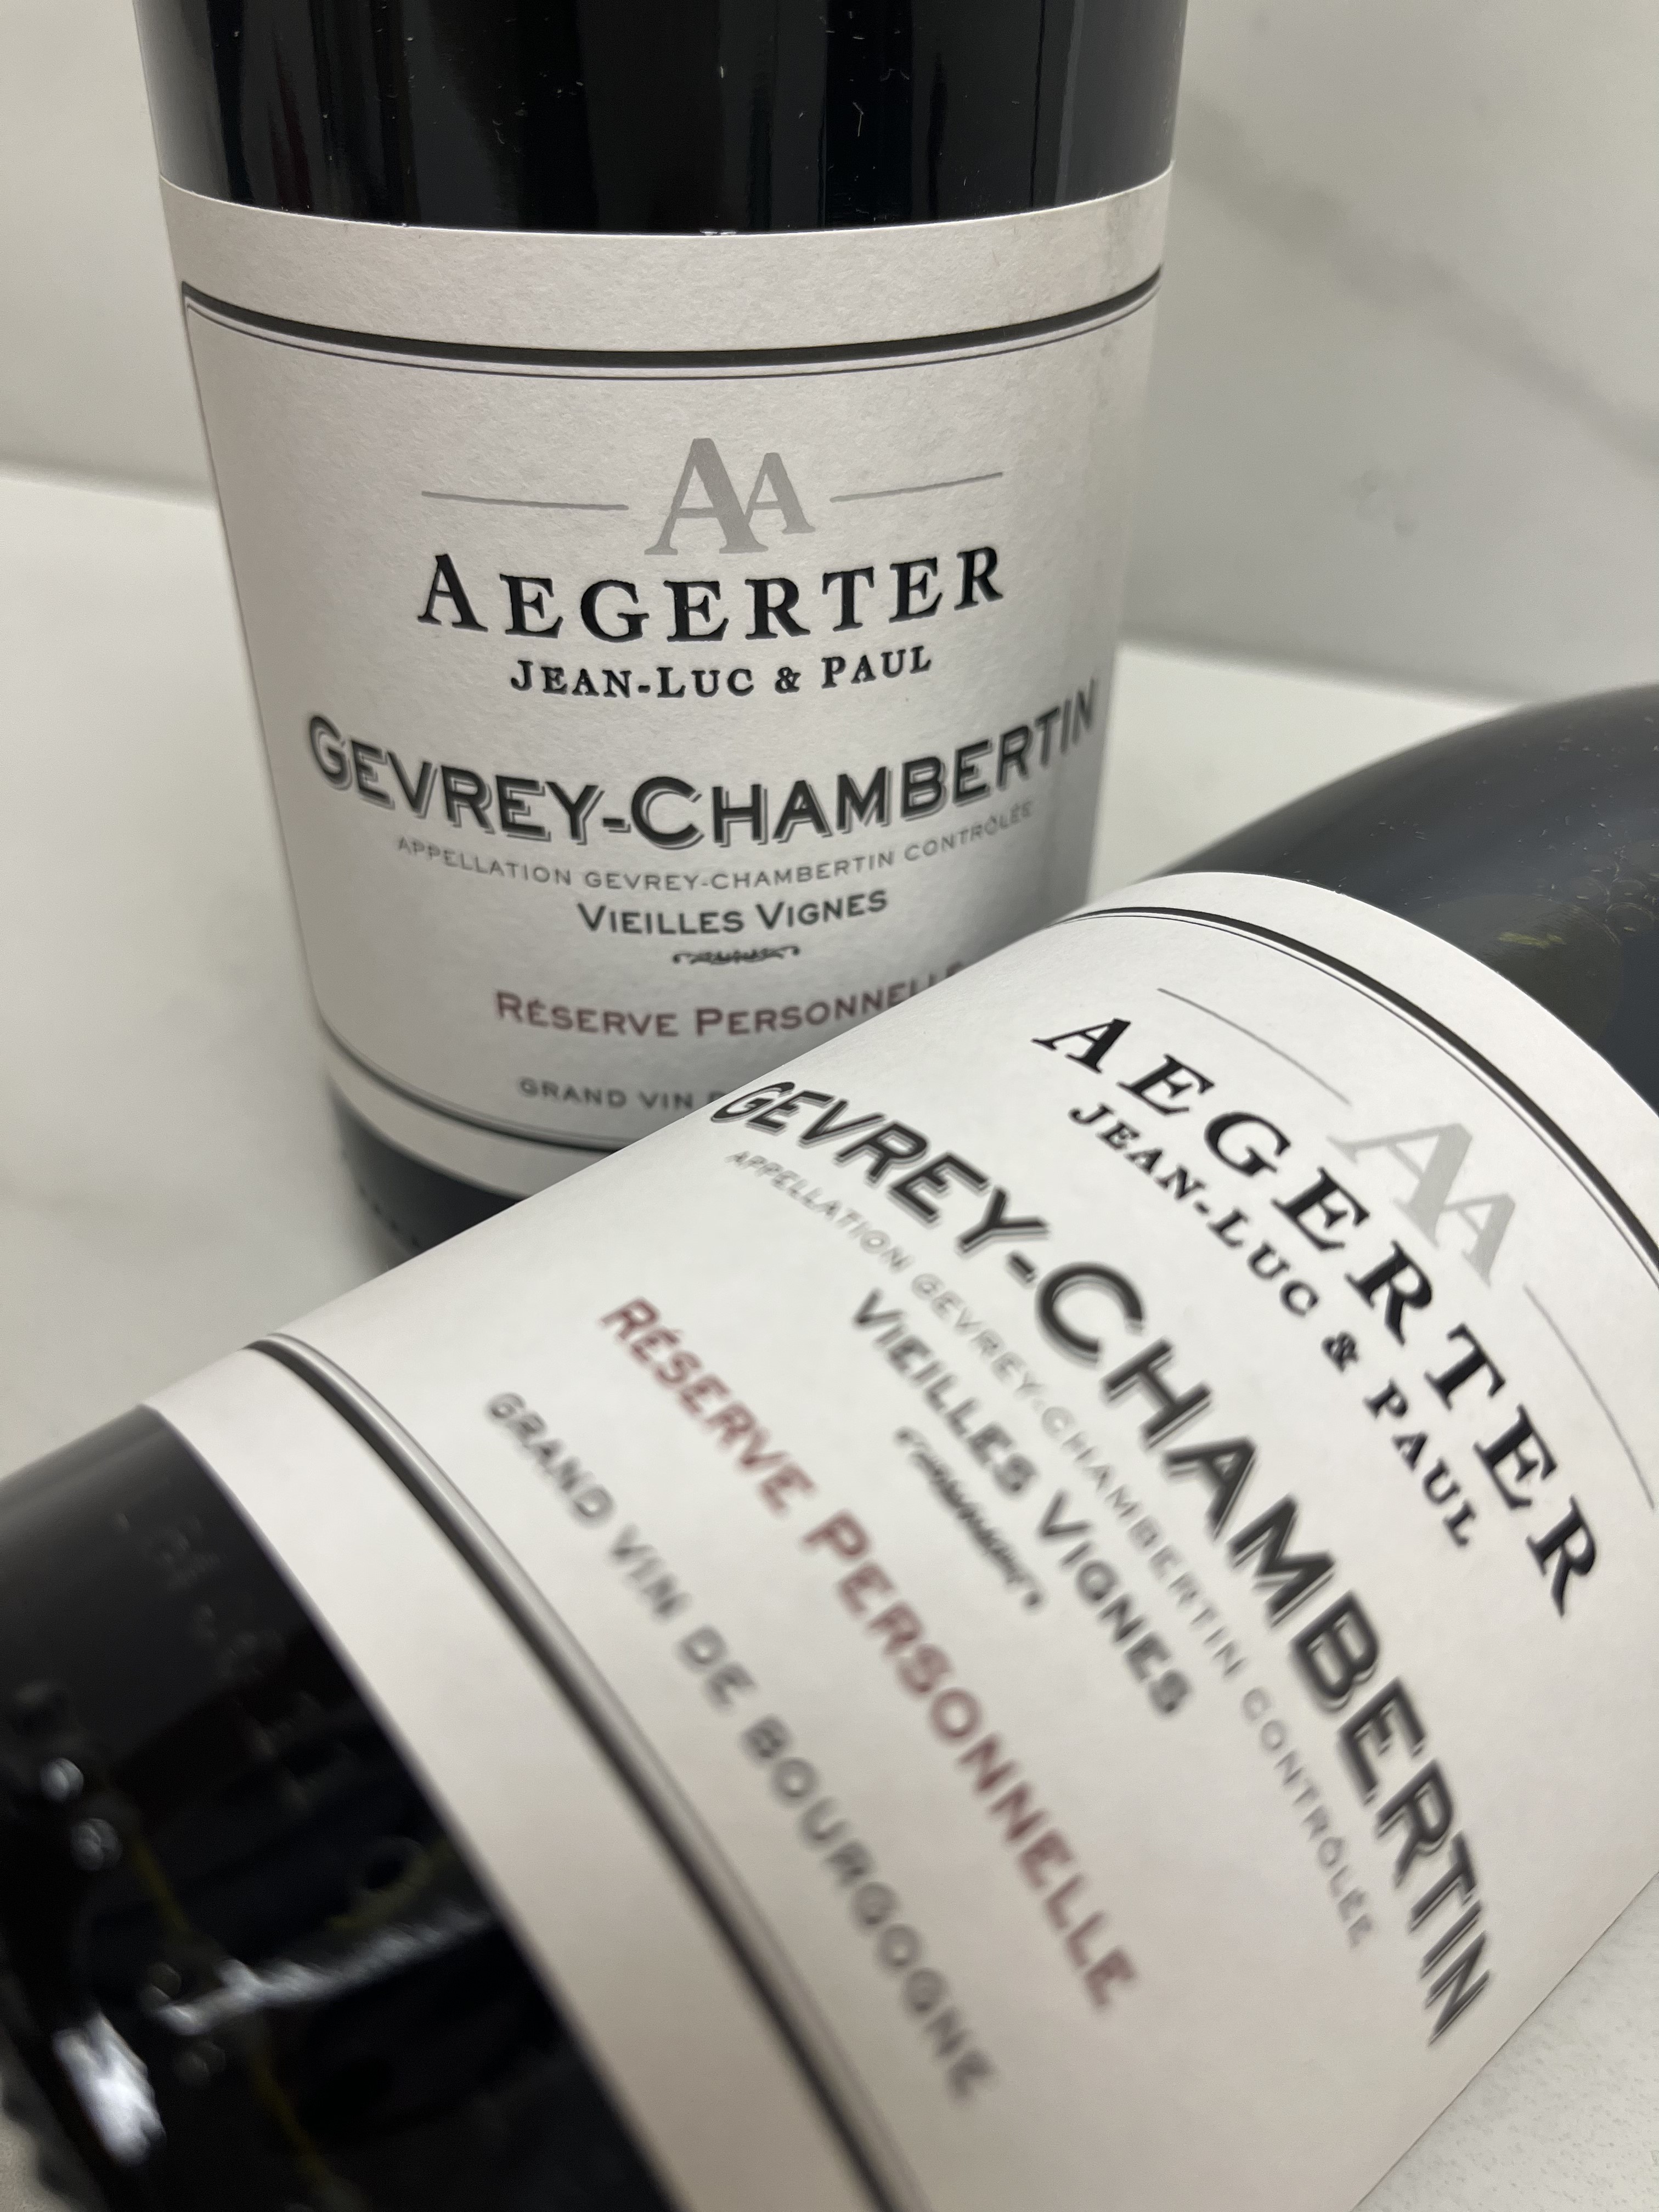 View All Wines from Aegerter, Jean Luc